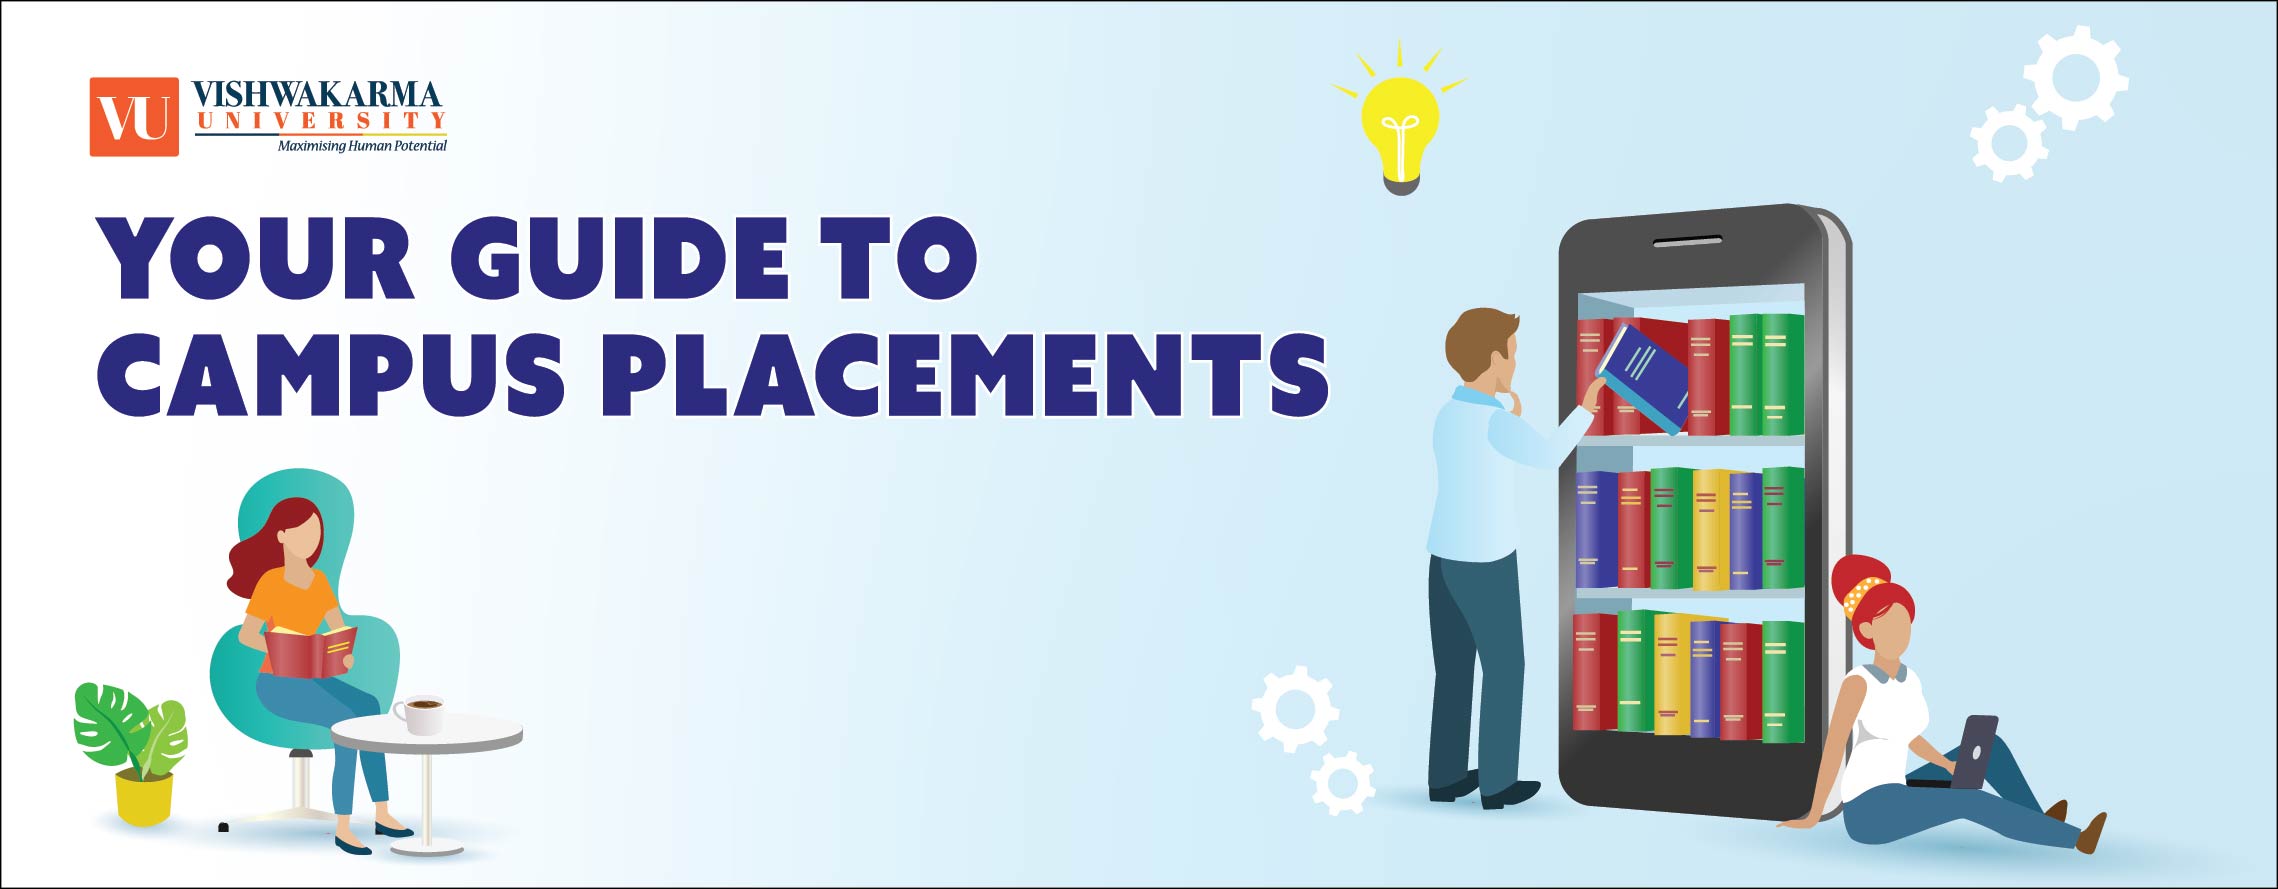 A Quick Introduction to Campus Placement Interviews